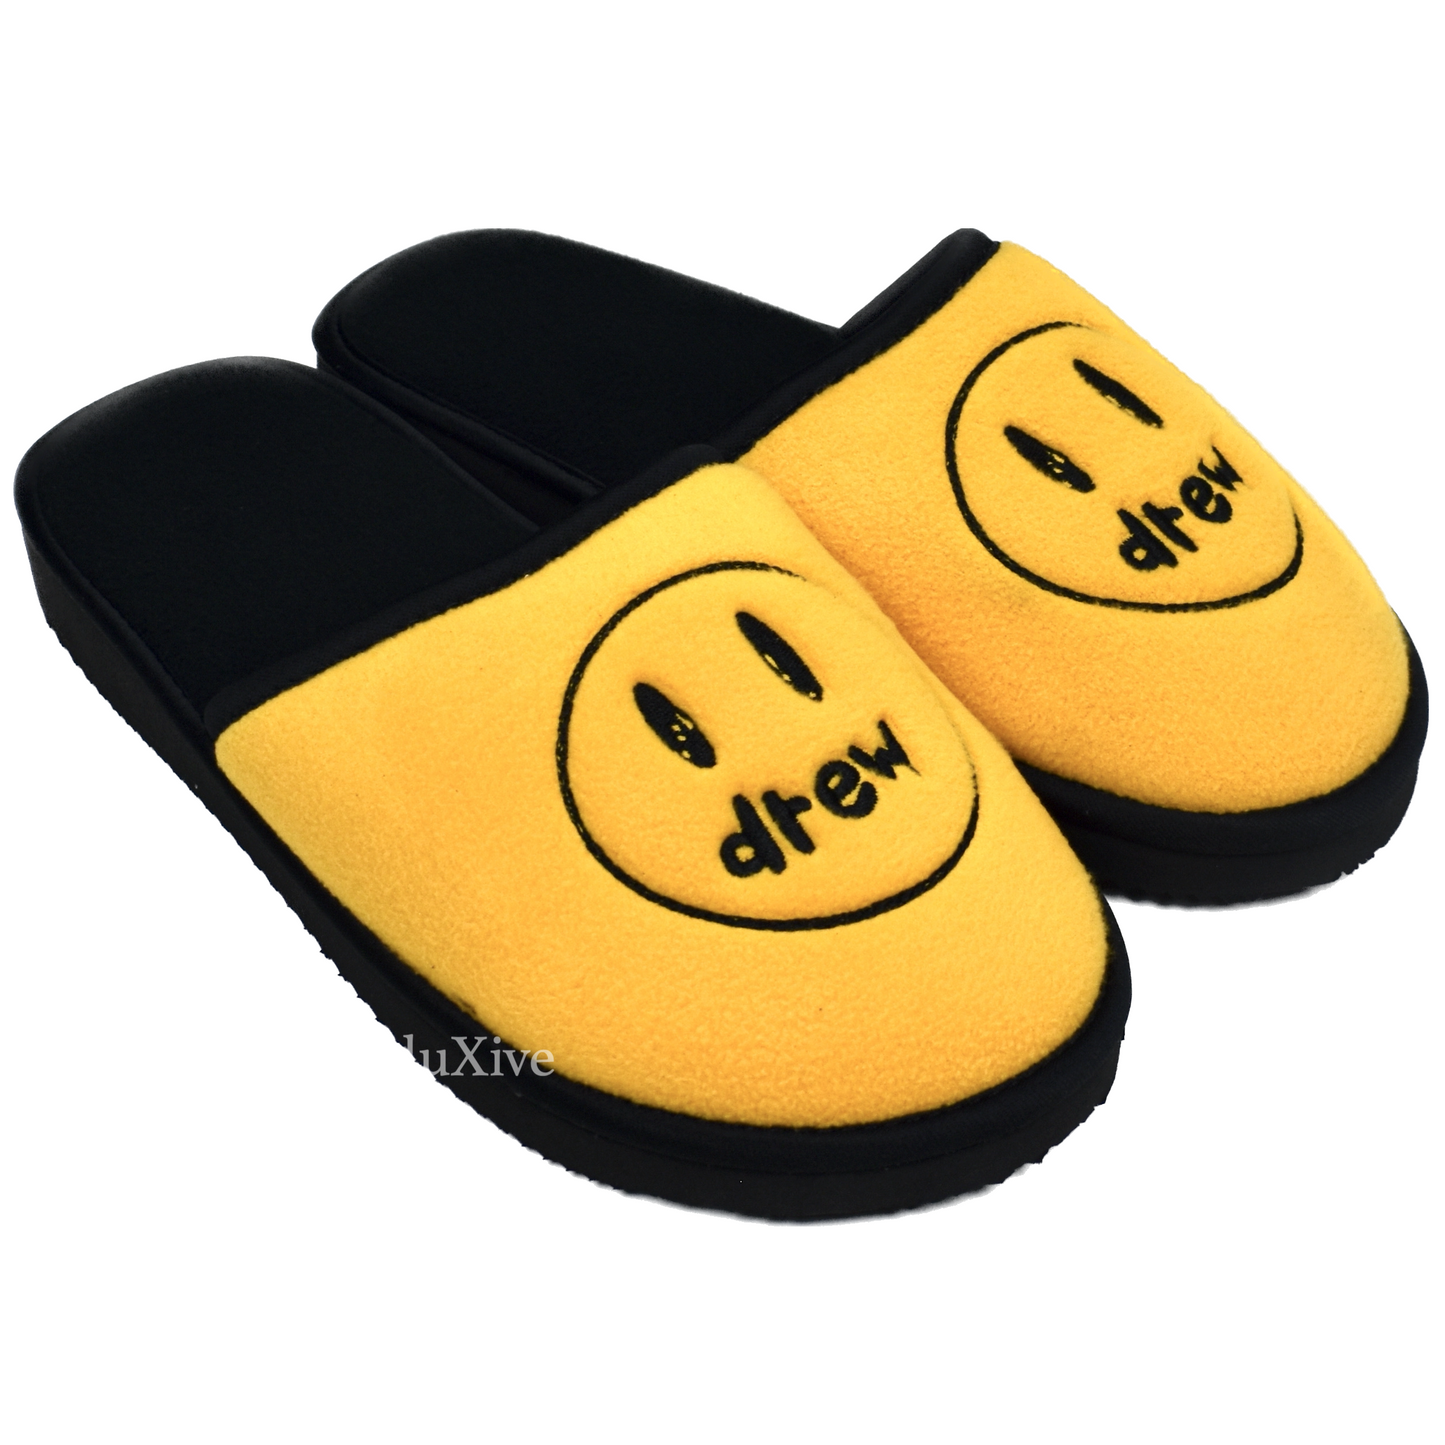 Drew House - Yellow Smiley Face Logo Slippers